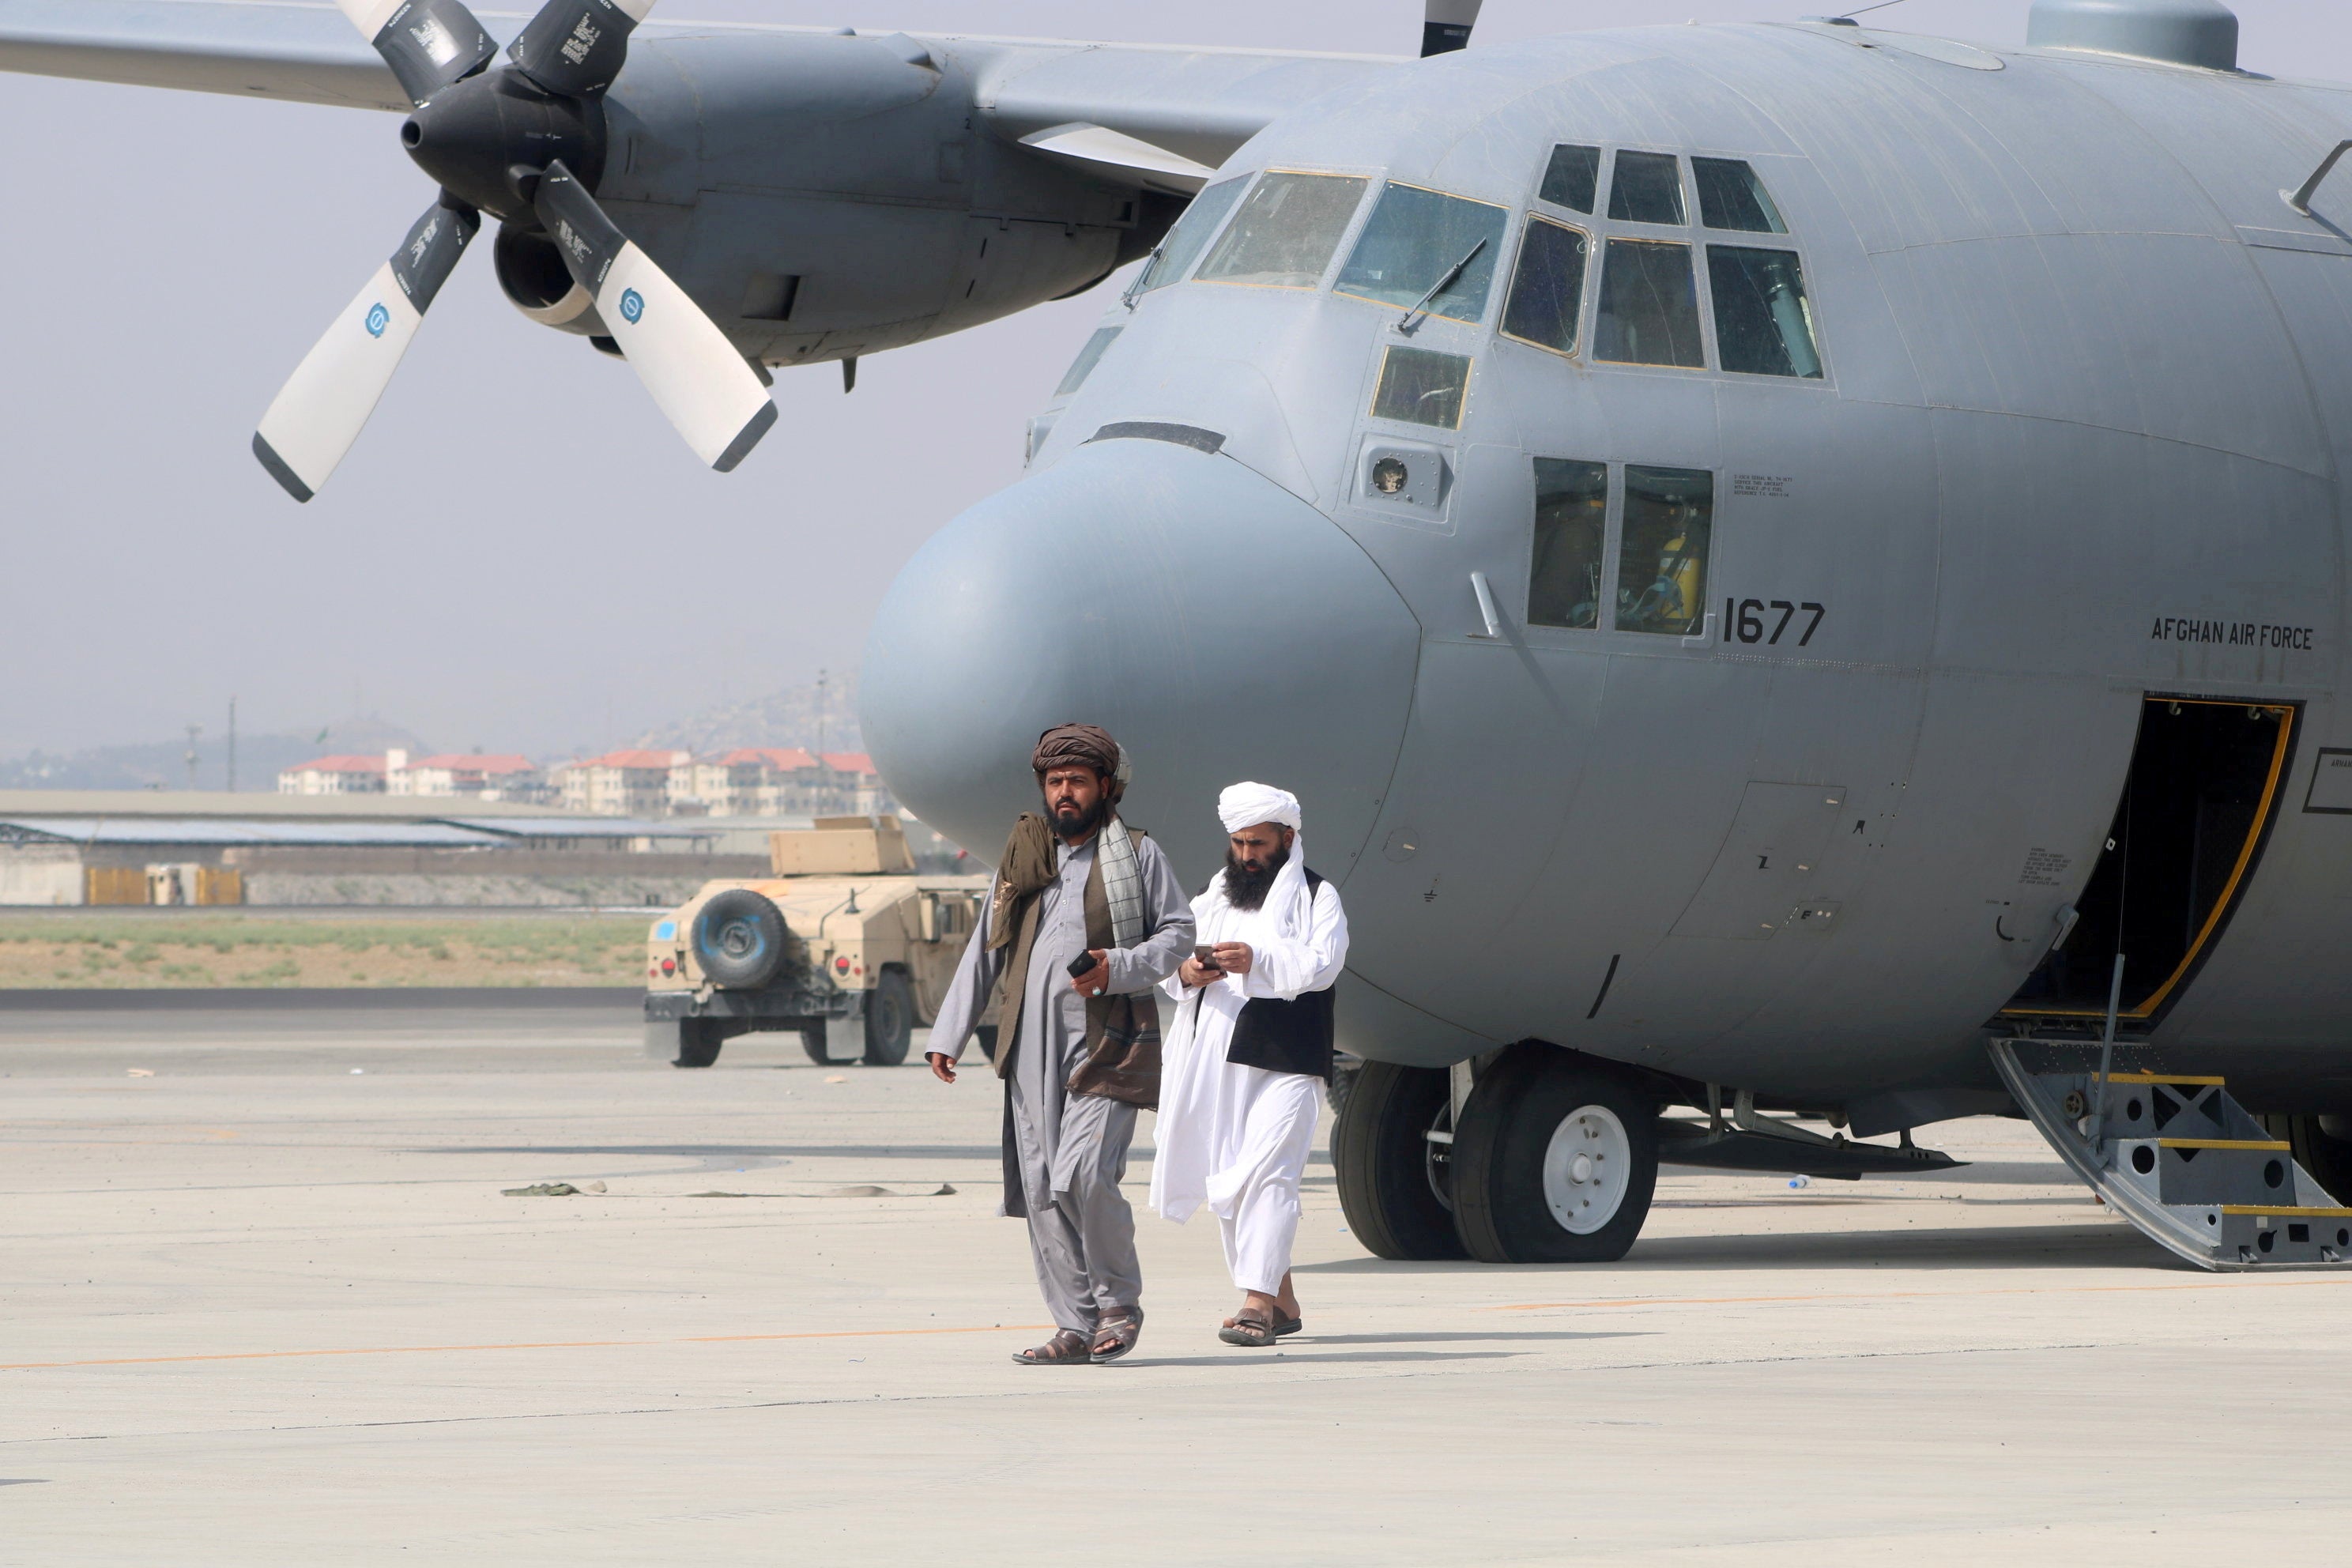 Taliban fighters walk in front of a military plane on Tuesday after sweeping the country in a matter of weeks